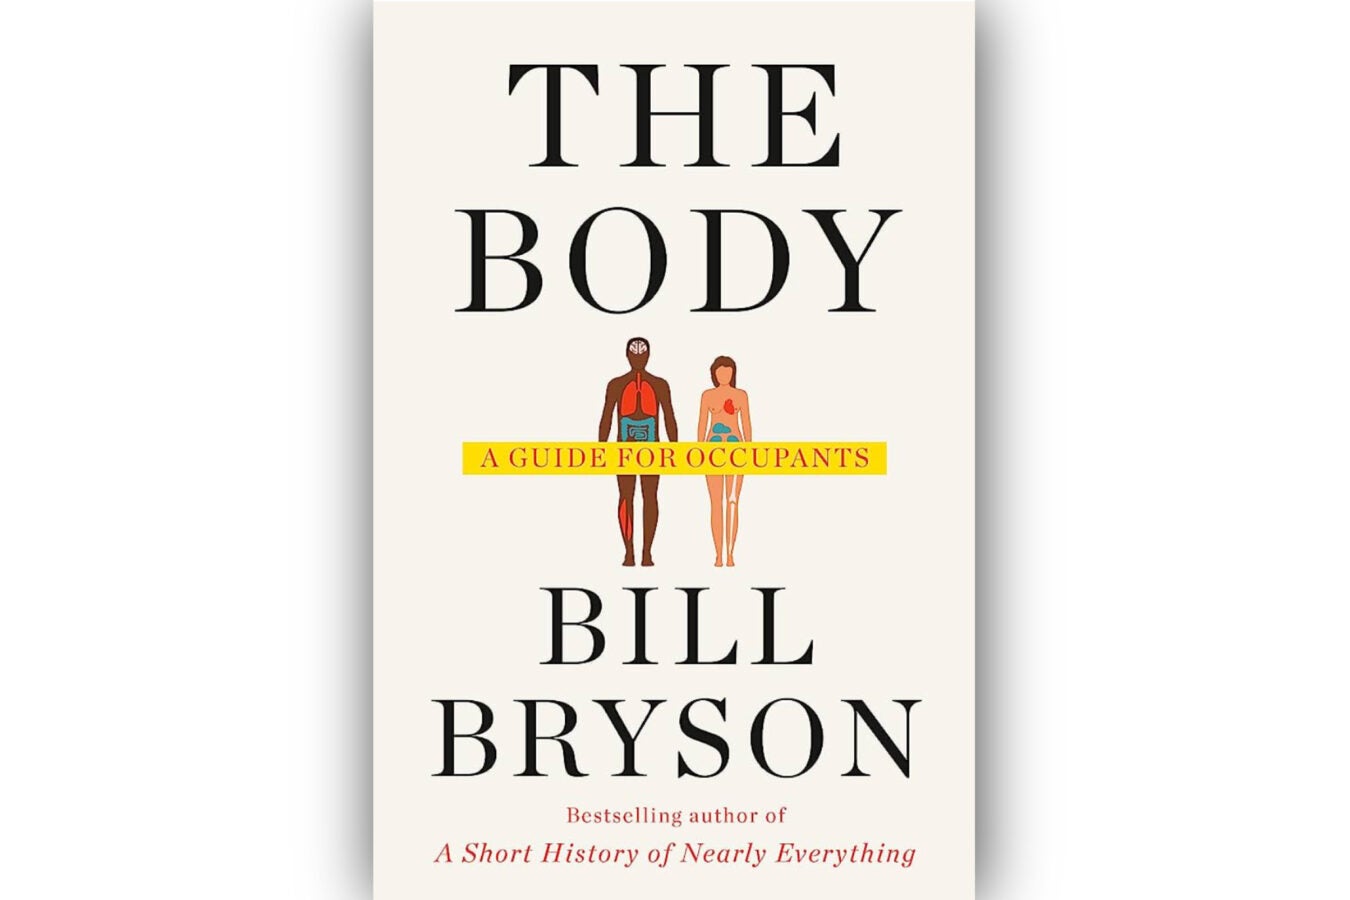 Book cover: “The Body: A Guide for Occupants” by Bill Bryson.